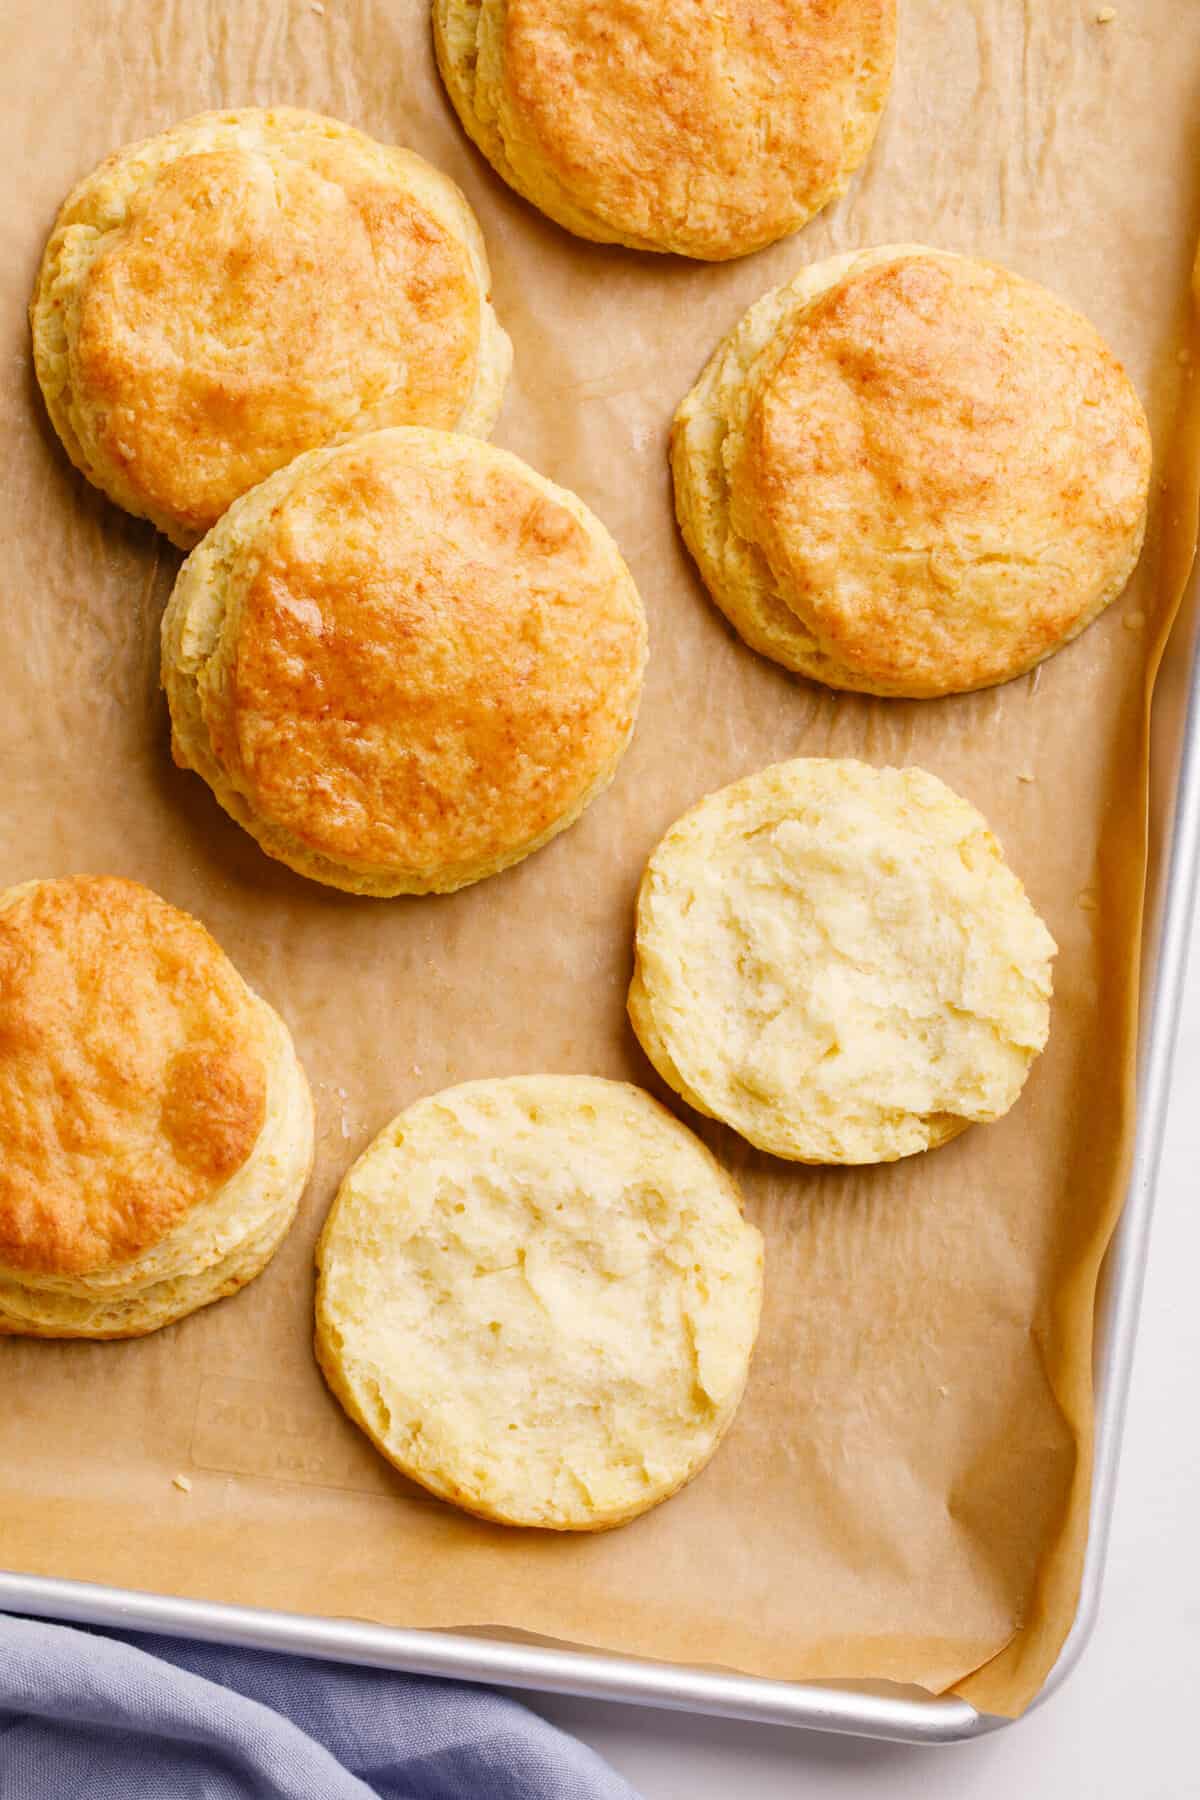 Top down image of Popeyes biscuits, sitting on a parchment lined baking tray.